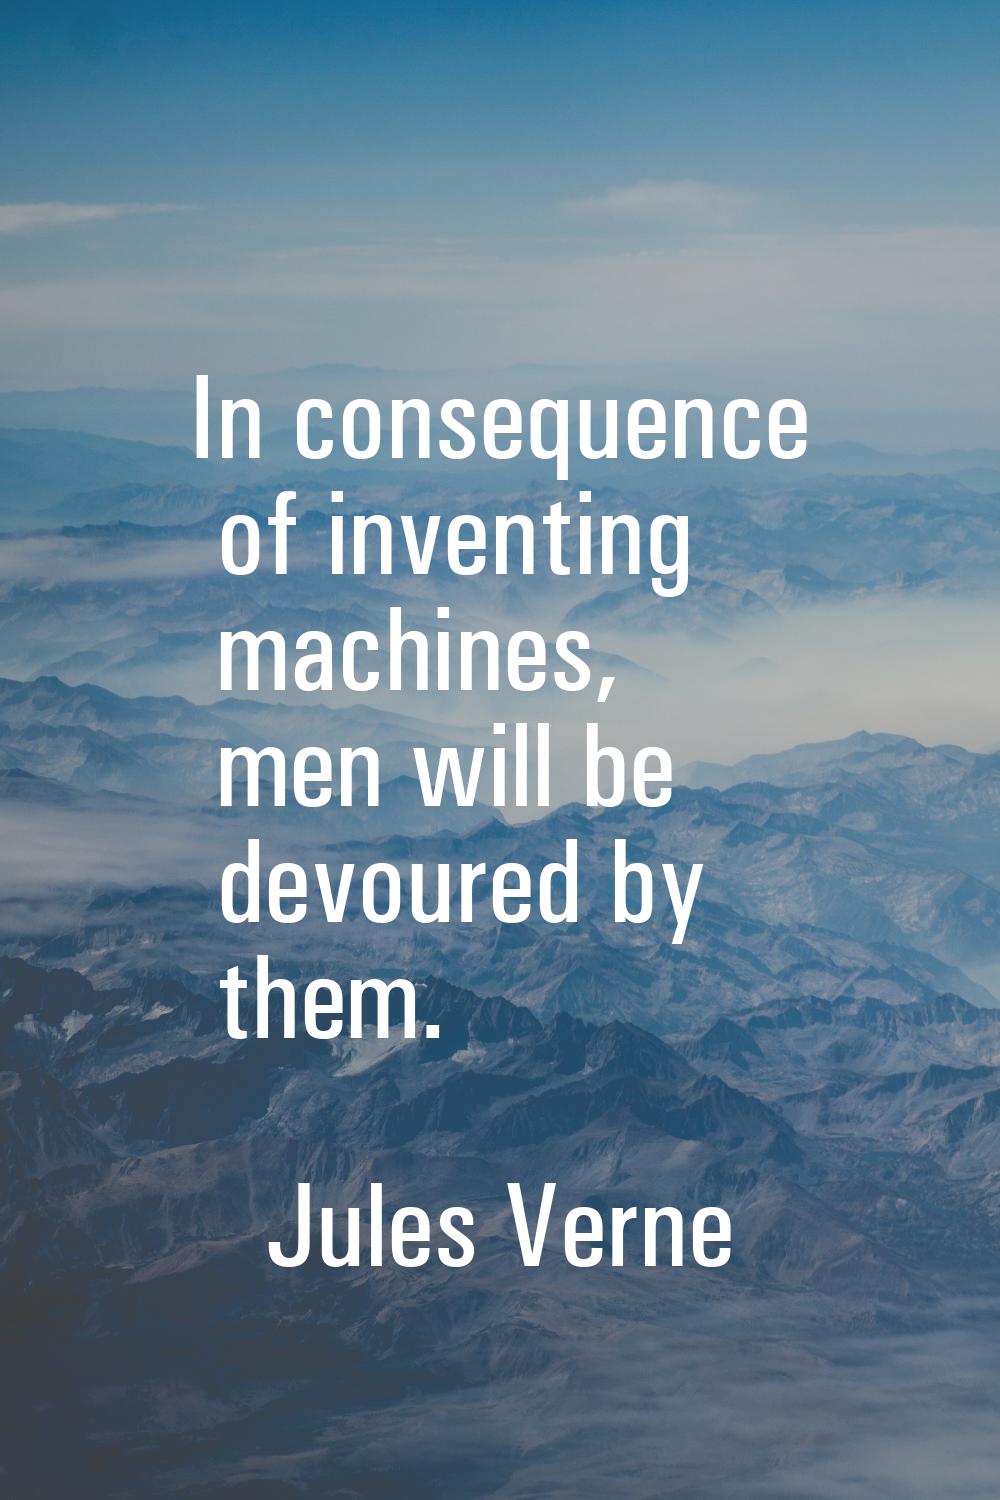 In consequence of inventing machines, men will be devoured by them.